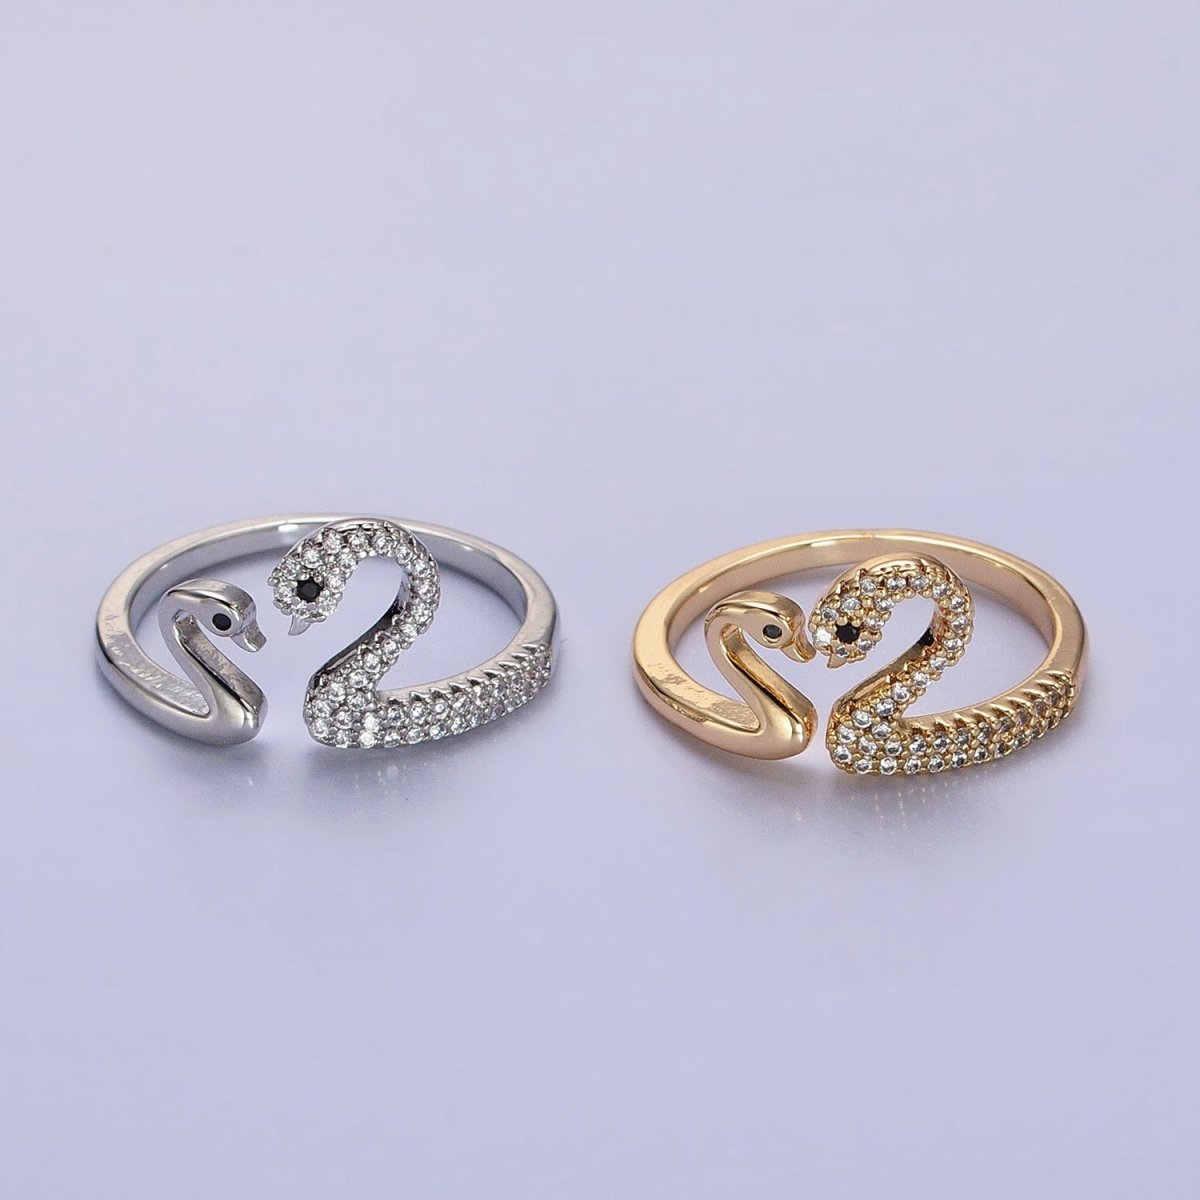 Dainty Two Swan Gold Ring, Adjustable Silver Swan Bird Ring Jewelry, Mother Daughter CZ Open Gold Ring Y-619 Y-620 - DLUXCA